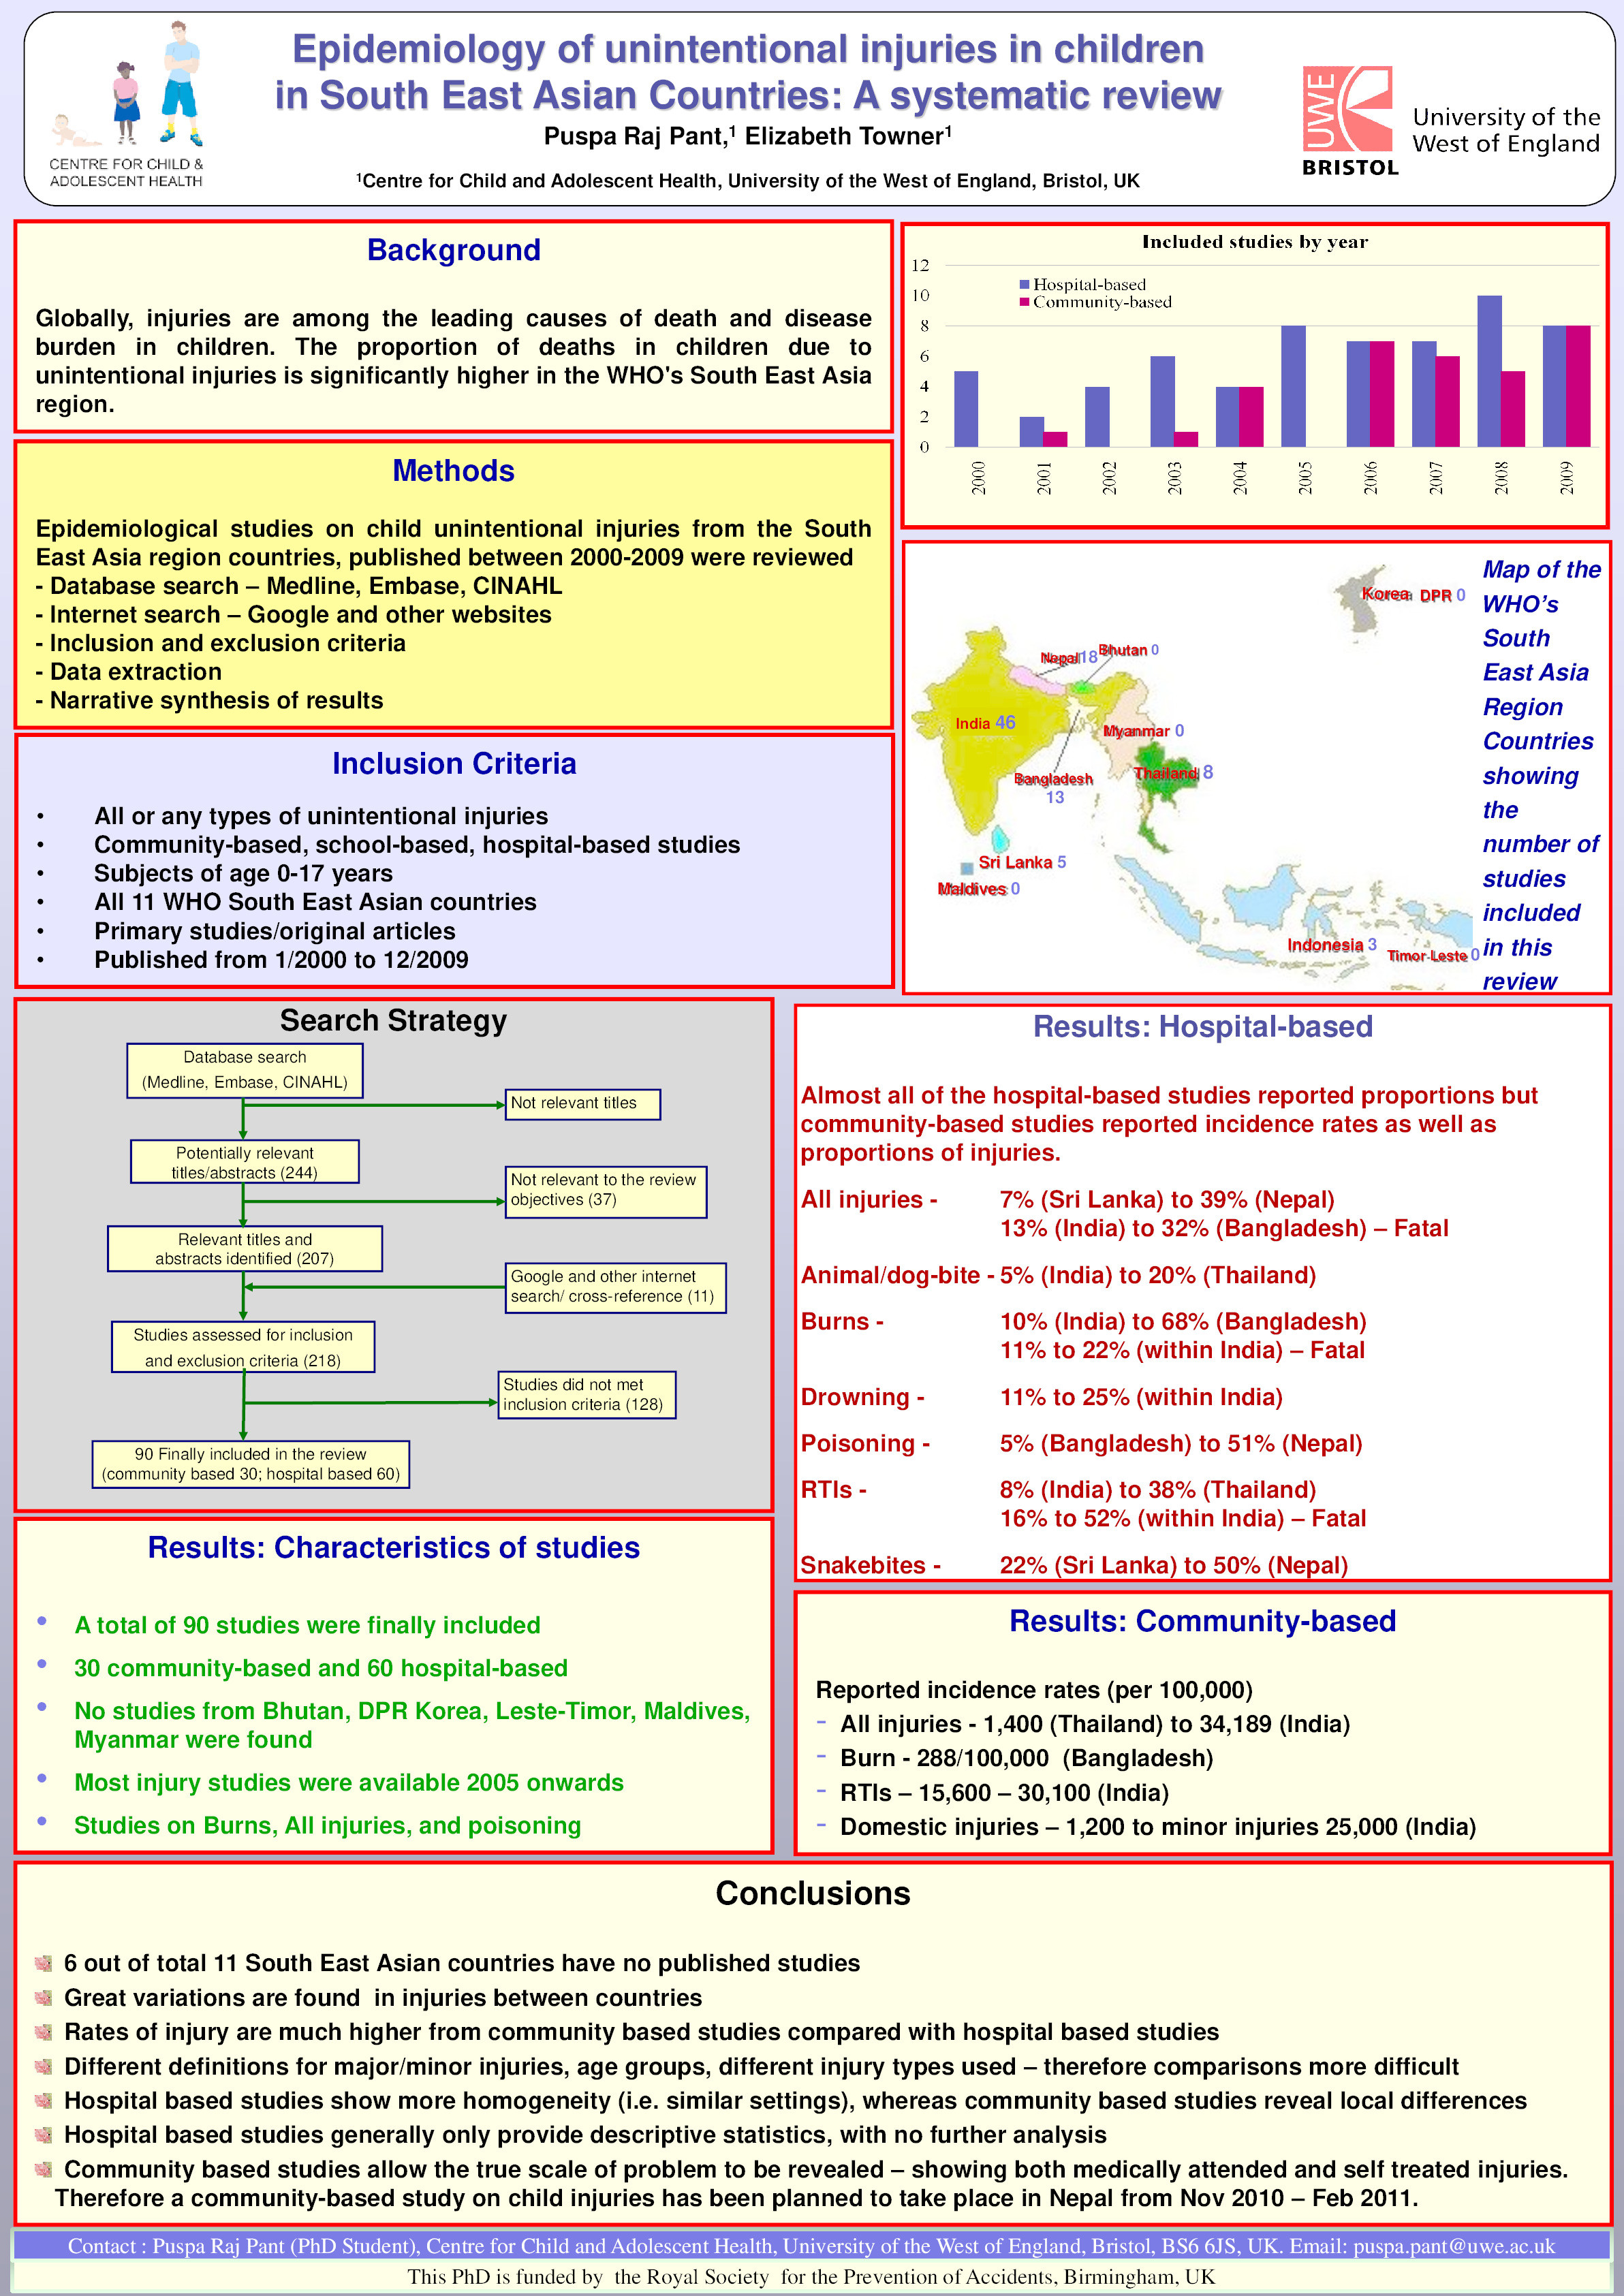 Epidemiology of unintentional injuries in children in South East Asian countries: A systematic review Thumbnail